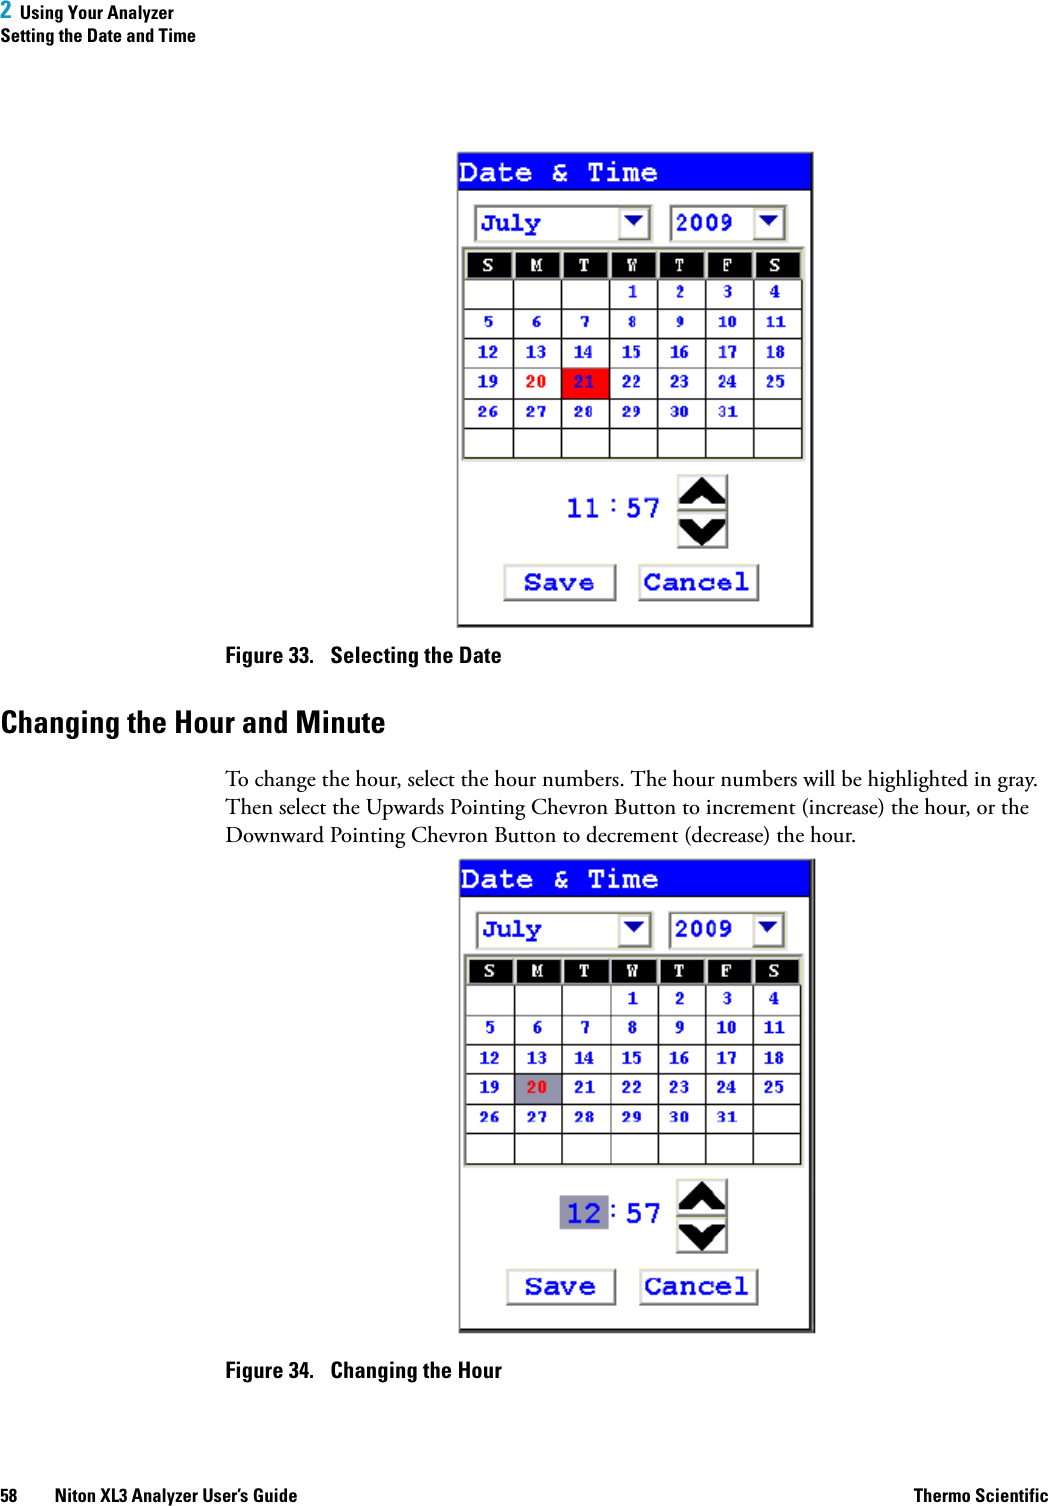 2  Using Your AnalyzerSetting the Date and Time58 Niton XL3 Analyzer User’s Guide Thermo ScientificFigure 33.  Selecting the DateChanging the Hour and MinuteTo change the hour, select the hour numbers. The hour numbers will be highlighted in gray. Then select the Upwards Pointing Chevron Button to increment (increase) the hour, or the Downward Pointing Chevron Button to decrement (decrease) the hour.Figure 34.  Changing the Hour